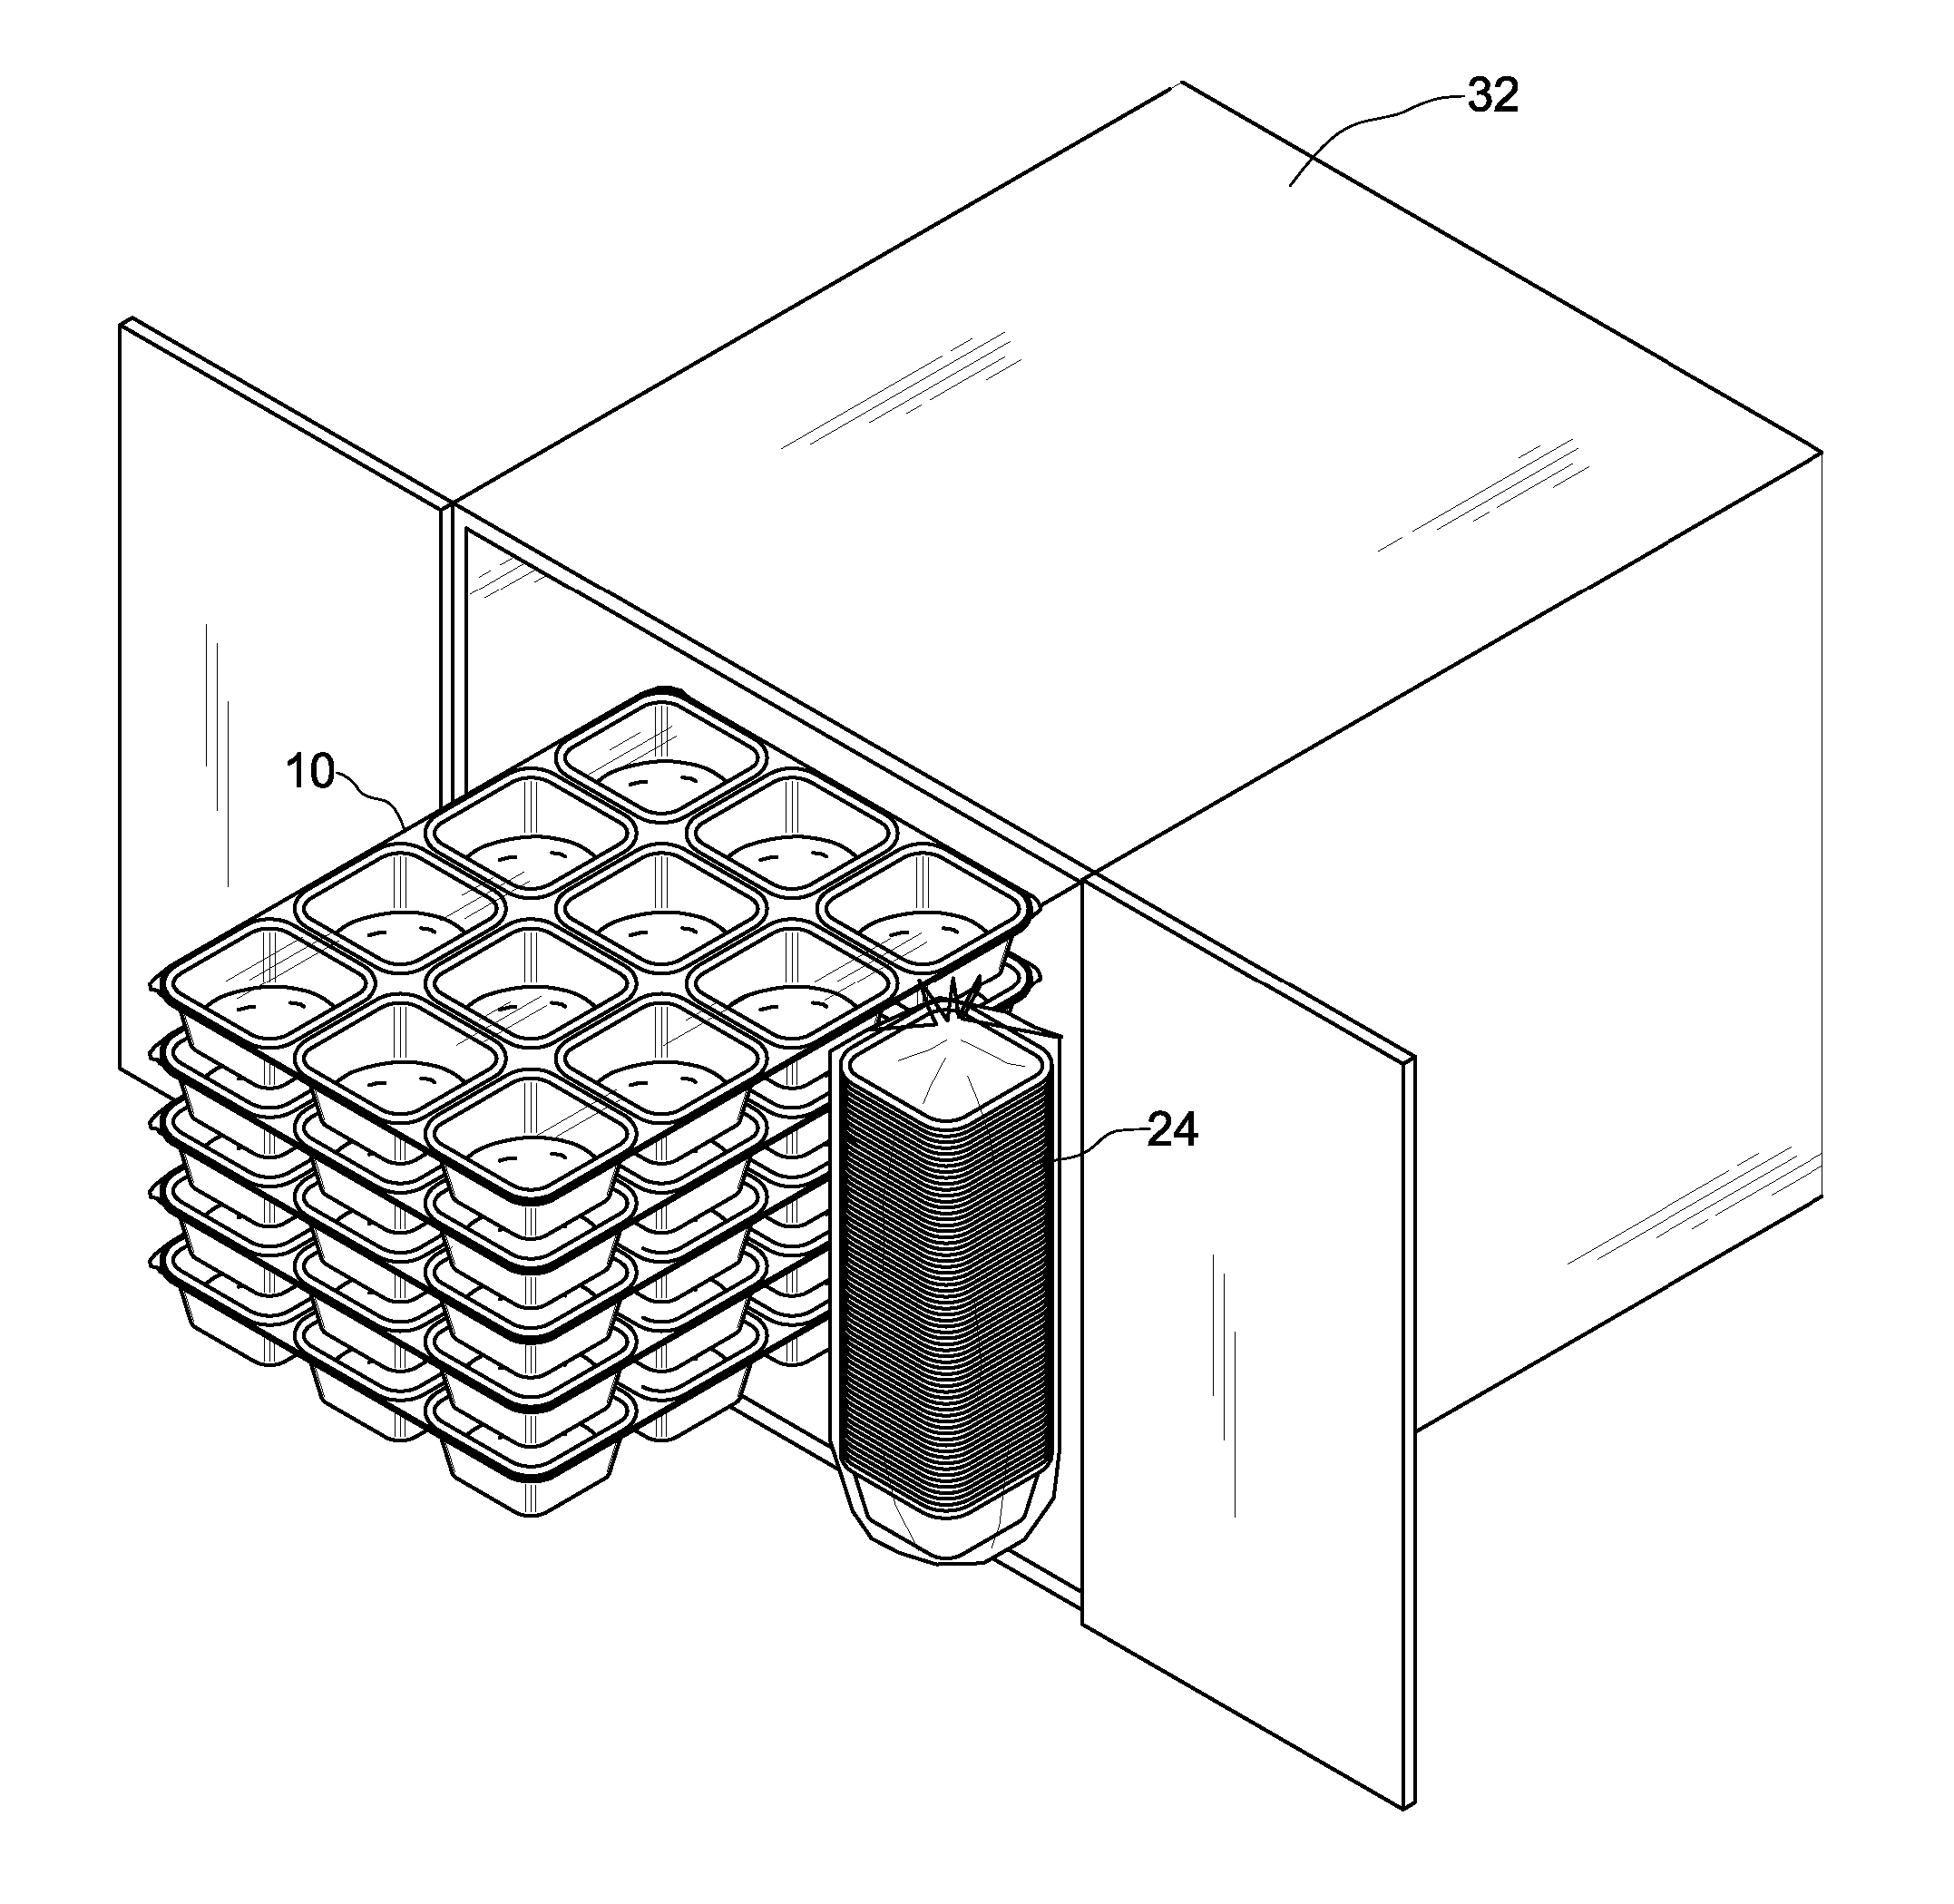 Method And Packaging For Baked, Thaw And Serve, Or Microwavable Goods